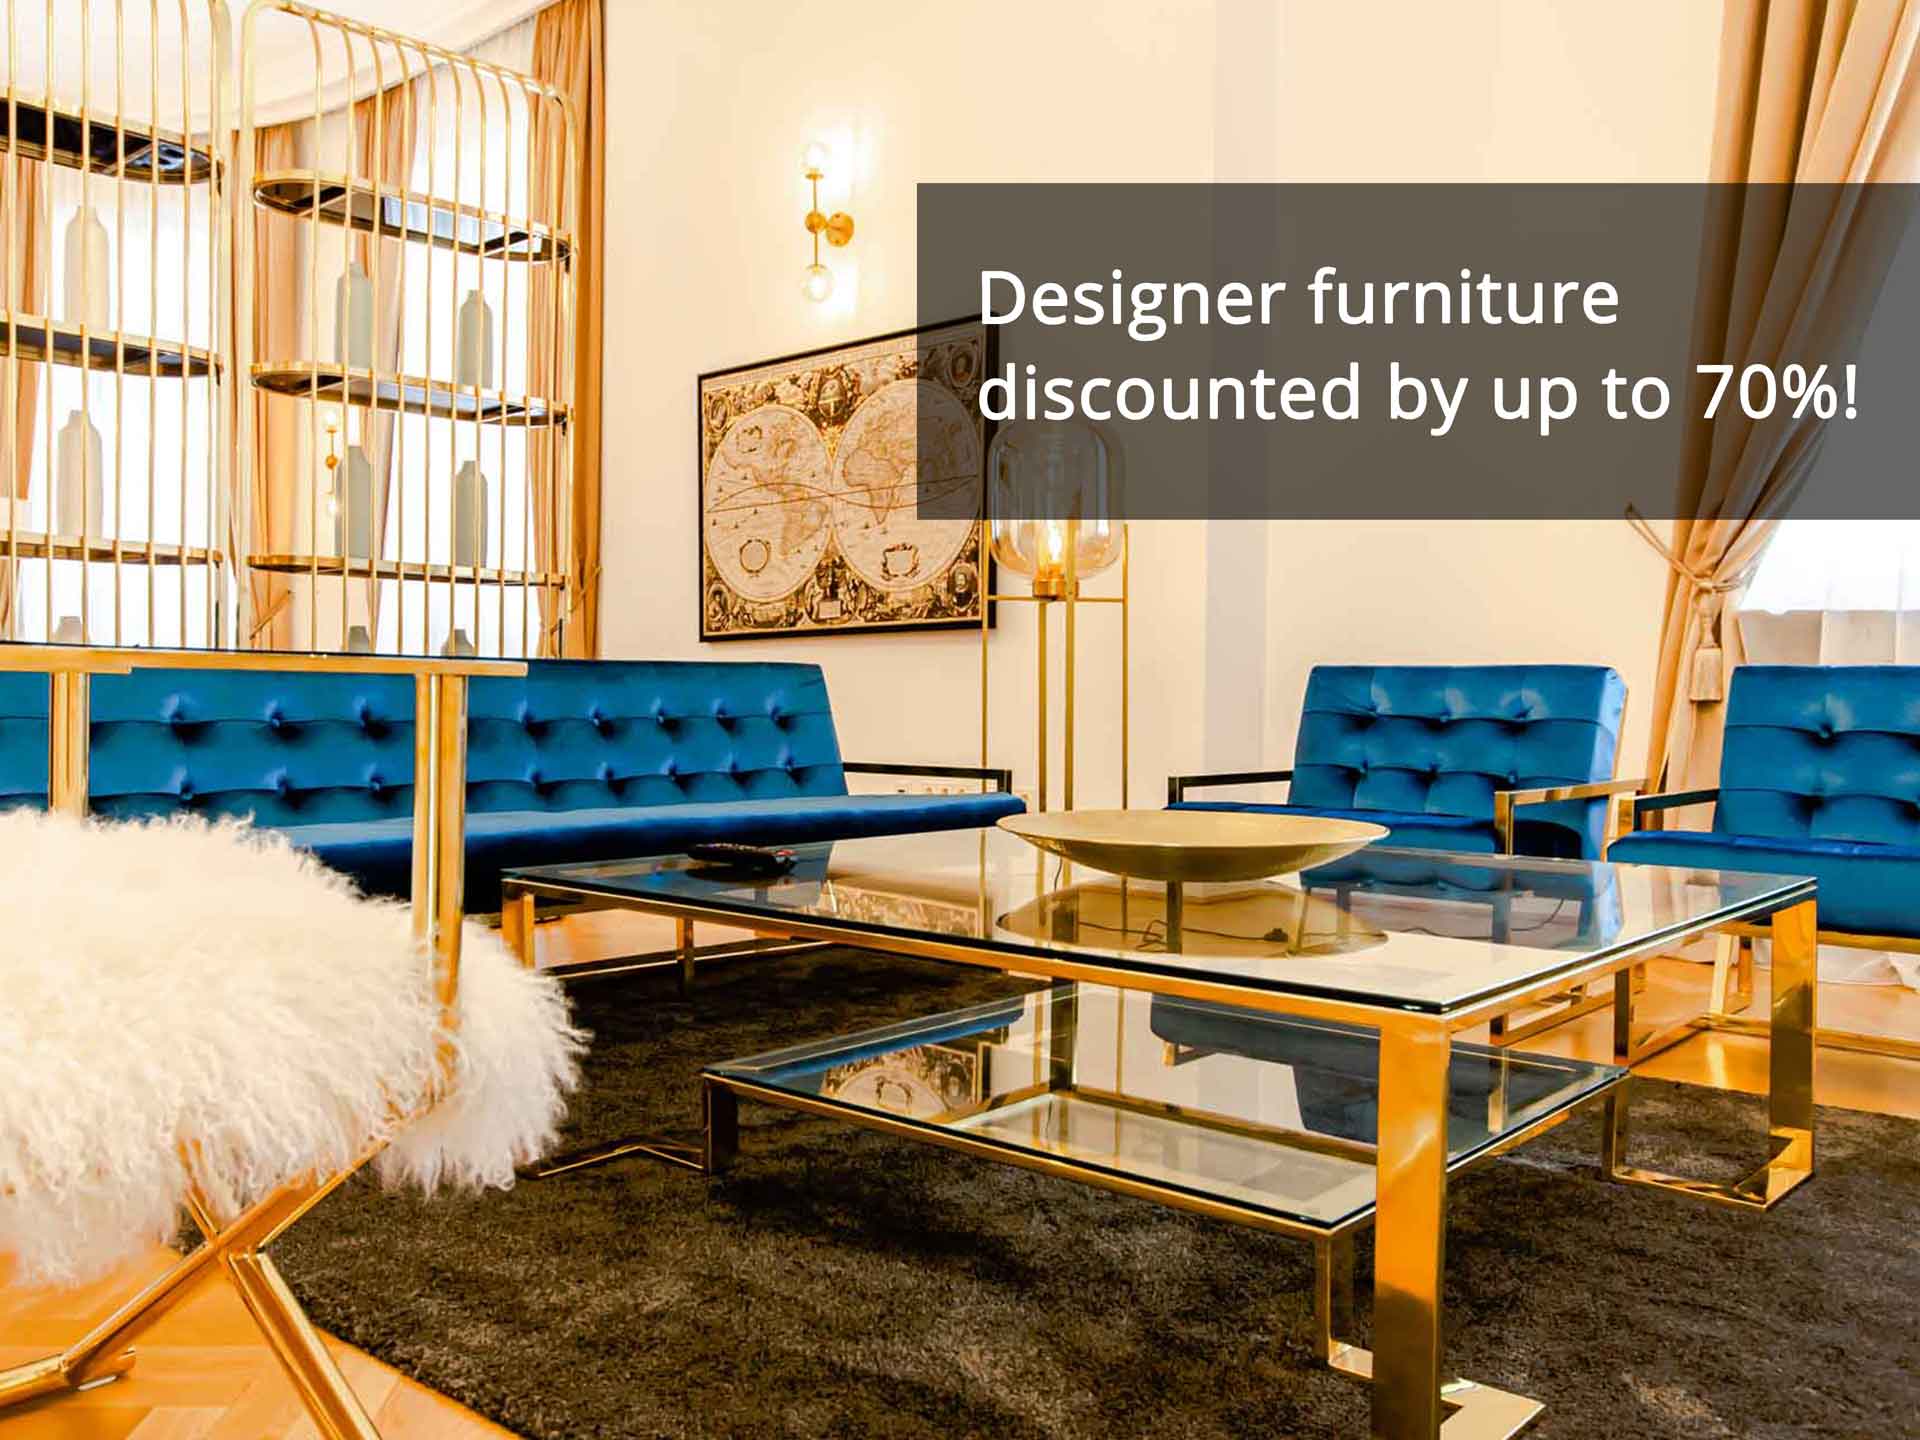 Designer furniture discounted by up to 70%